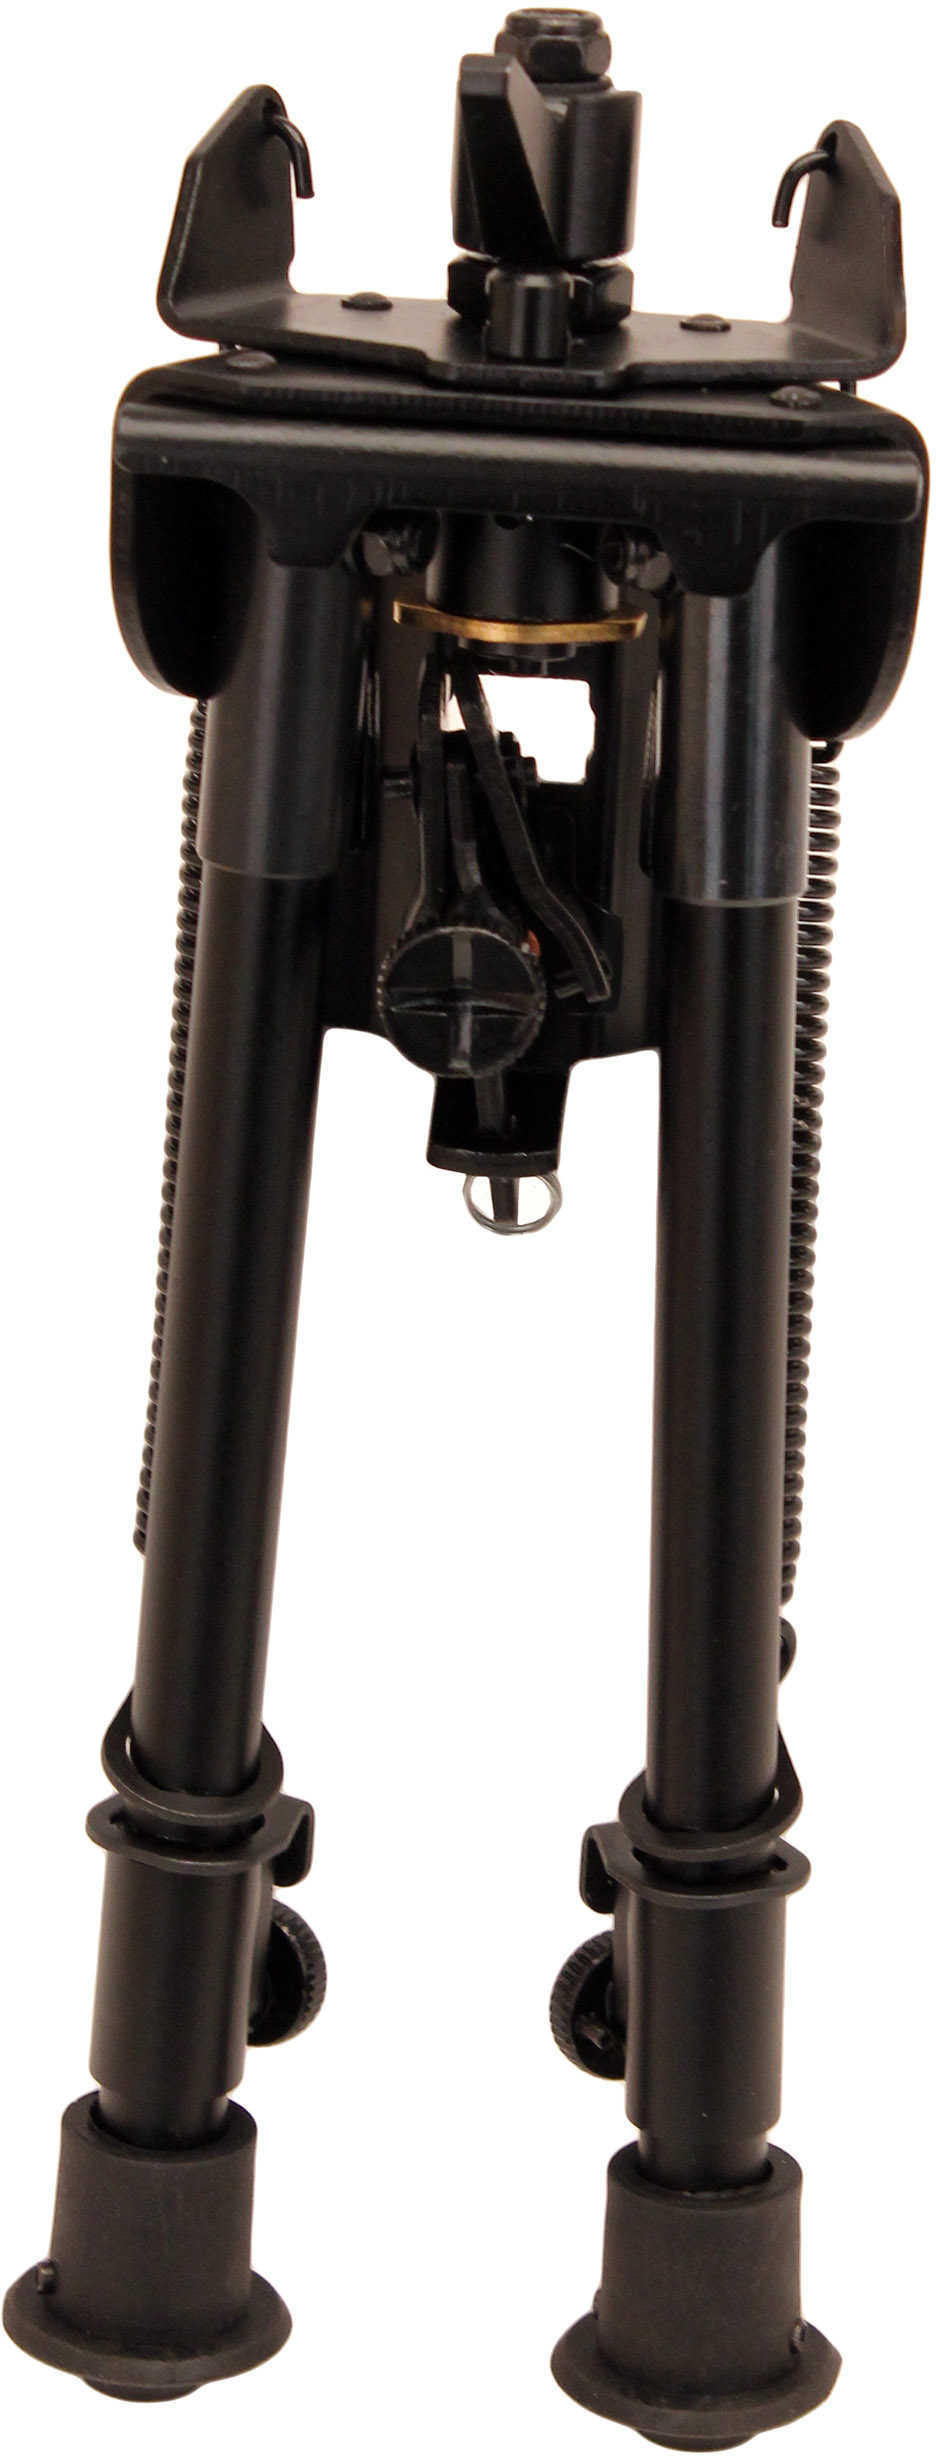 Rock Mount Pivot Bipod Adjustable 9"-13" Compact & Lightweight - No Assembly required - Telescoping egs Have Spring retu